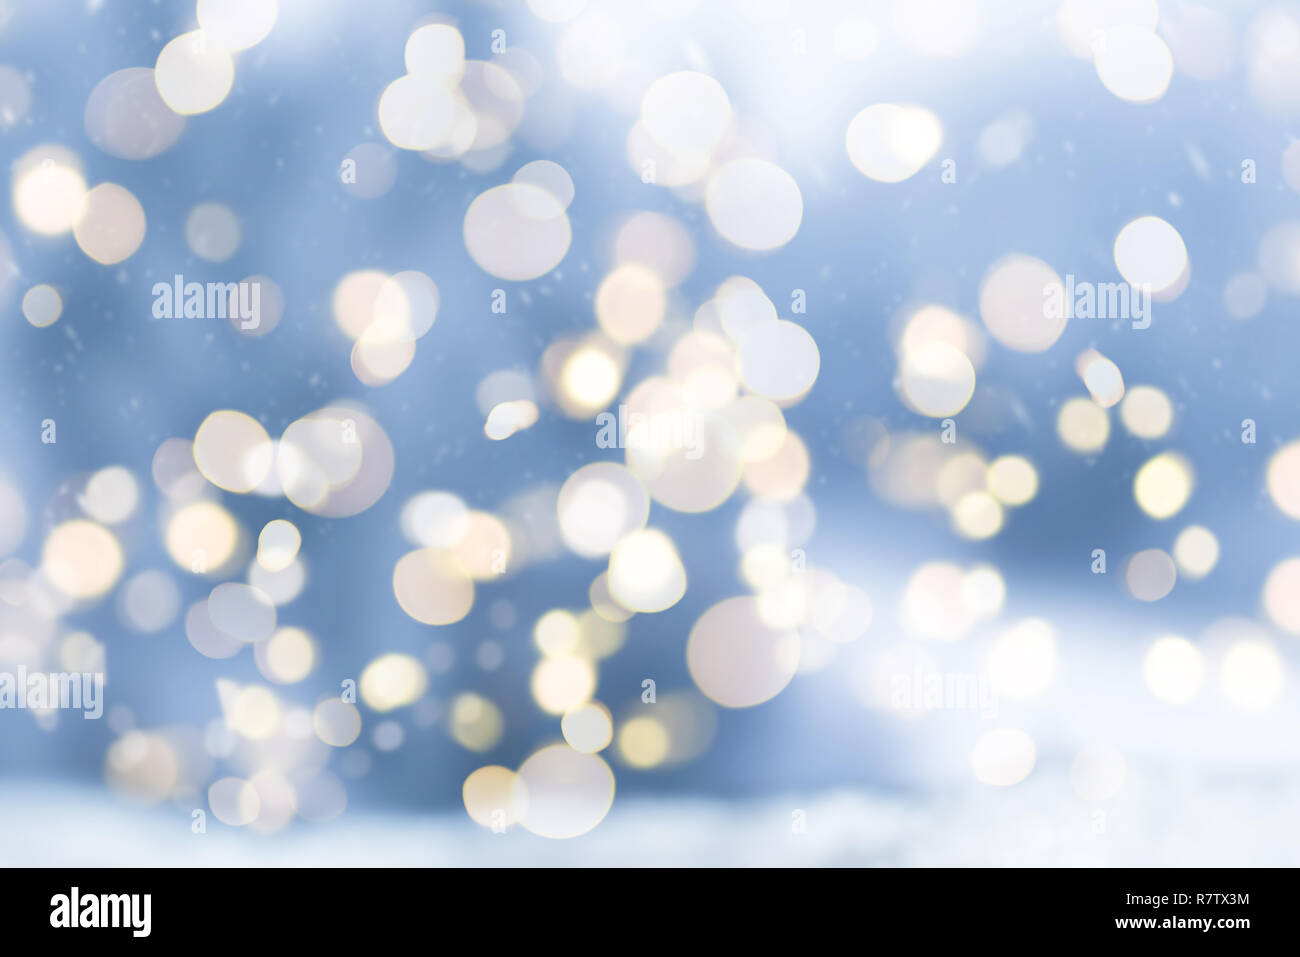 blurry snowy winter christmas background with circular bokeh lights  Stock Photo